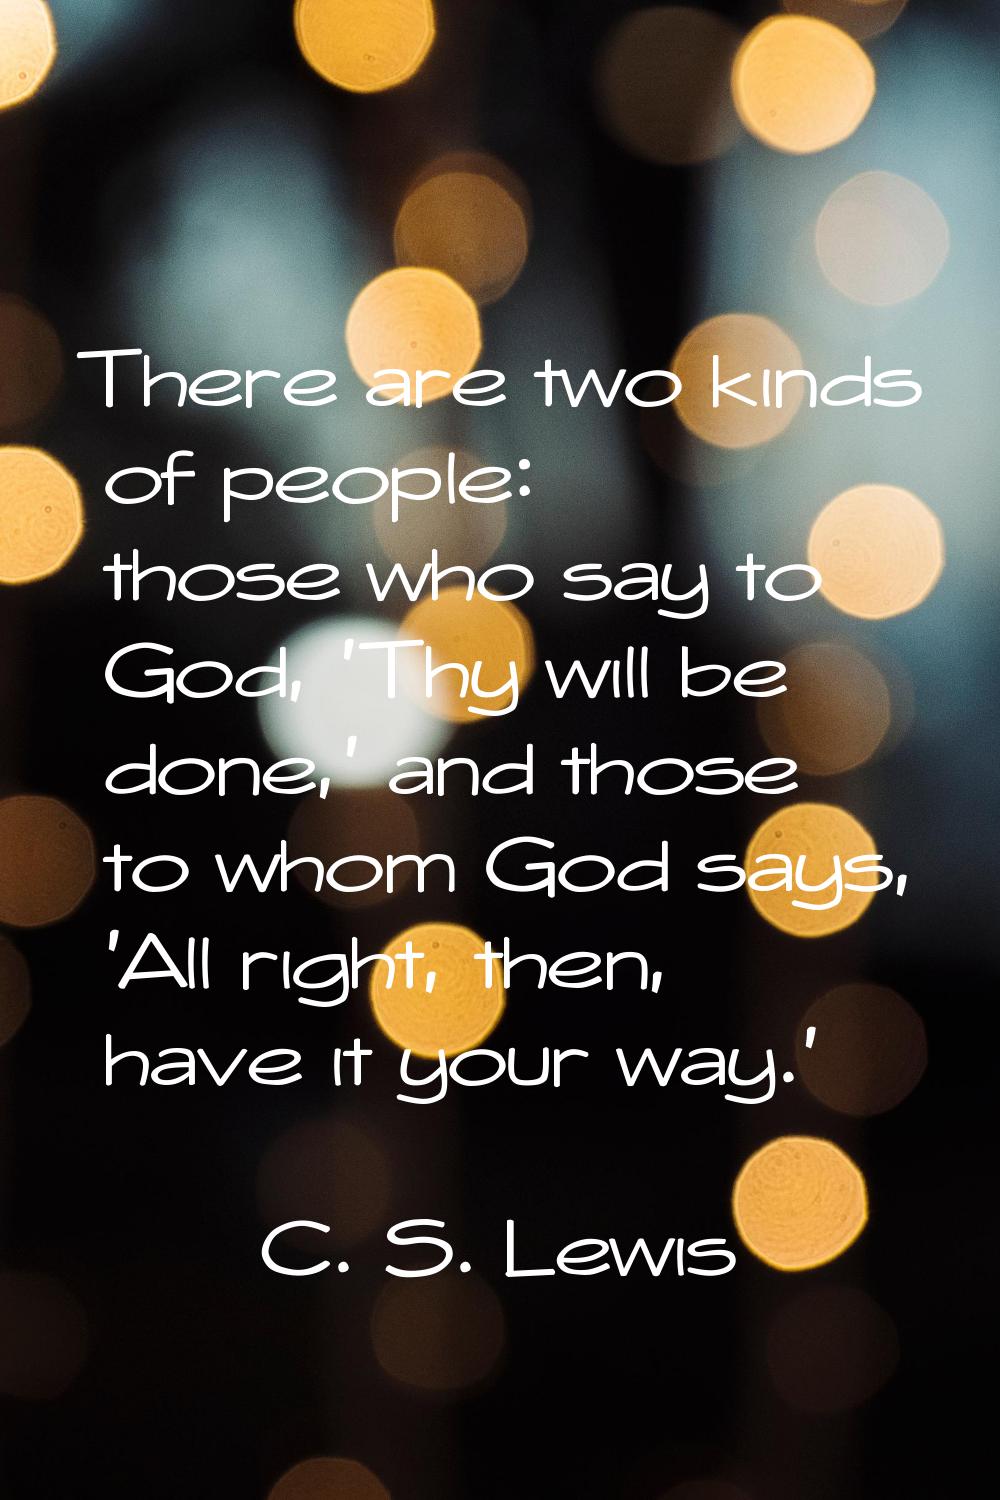 There are two kinds of people: those who say to God, 'Thy will be done,' and those to whom God says